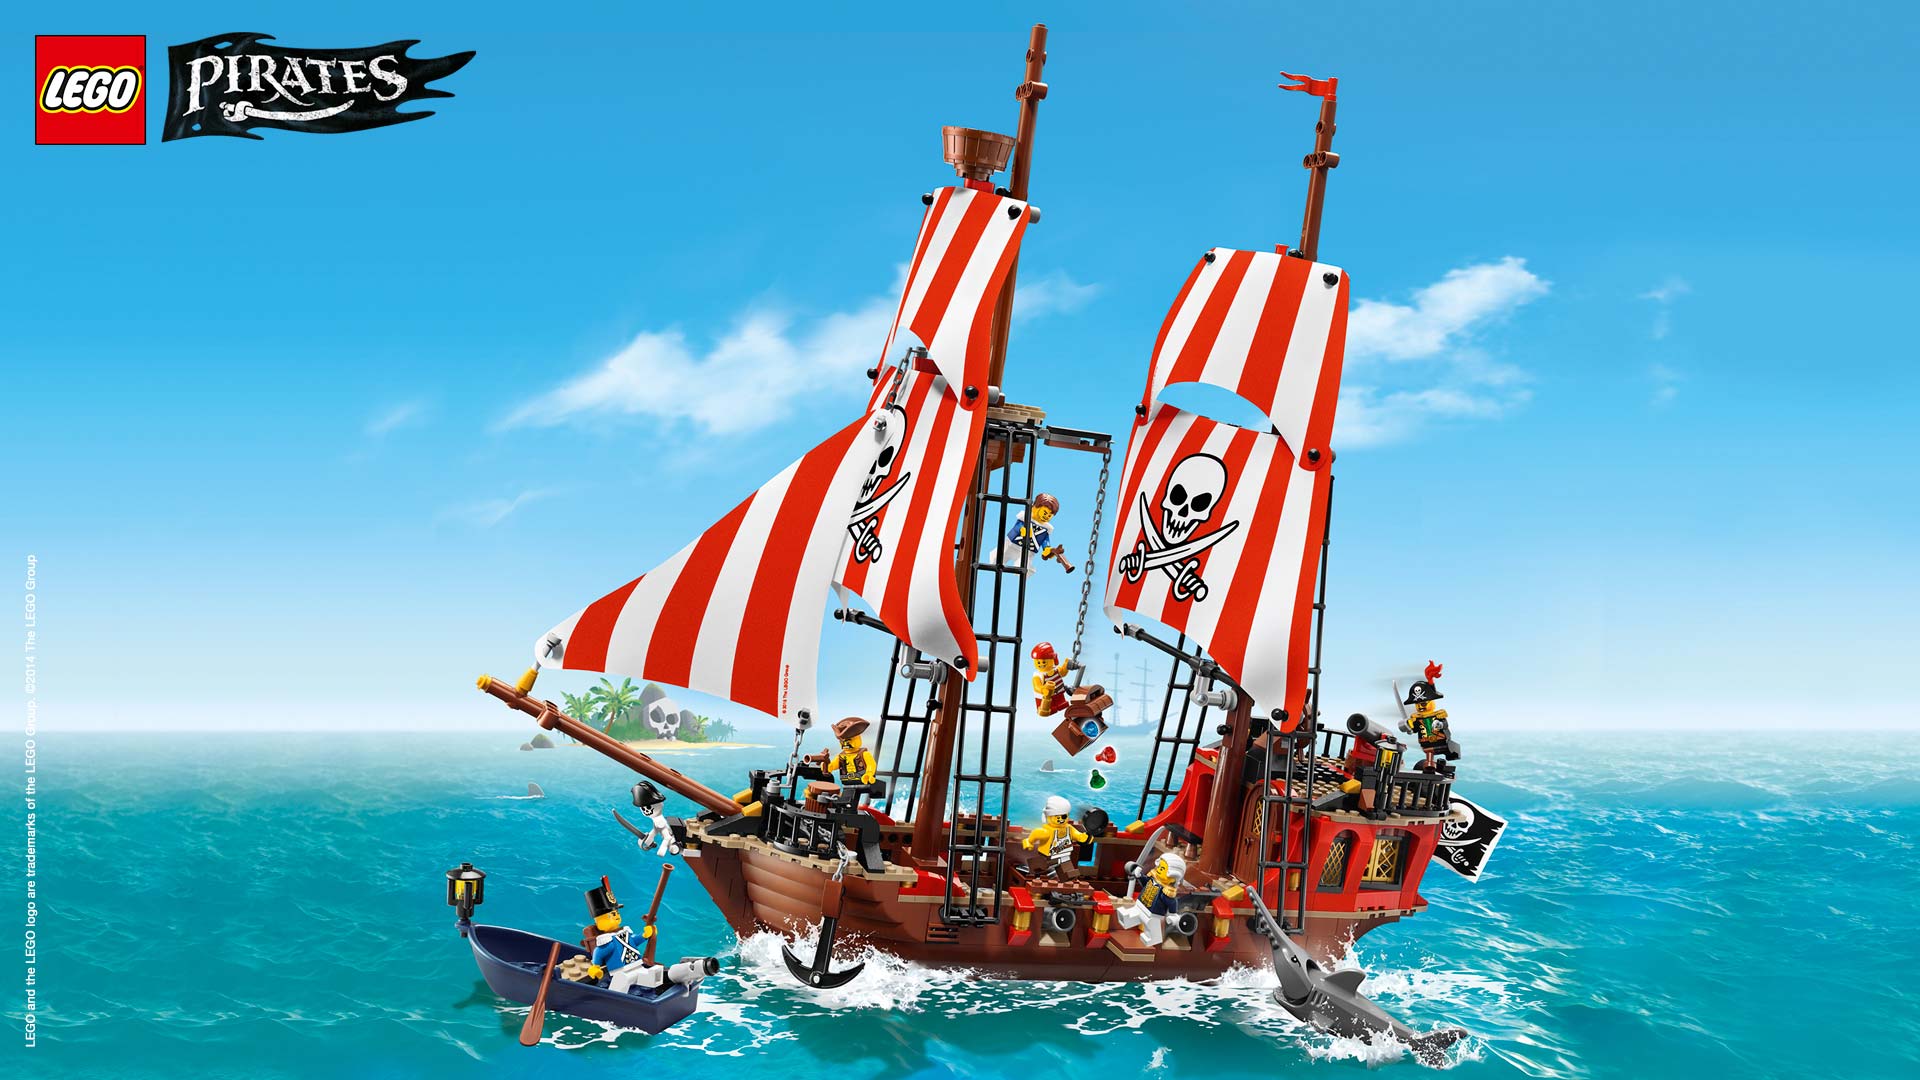 Free download Pirate ship wallpaper Wallpaper Activities LEGO Pirates LEGO [1920x1080] for your Desktop, Mobile & Tablet. Explore Pirate Ship Wallpaper for Desktop. Pirate Wallpaper, Pirate Ship Wallpaper, 3D